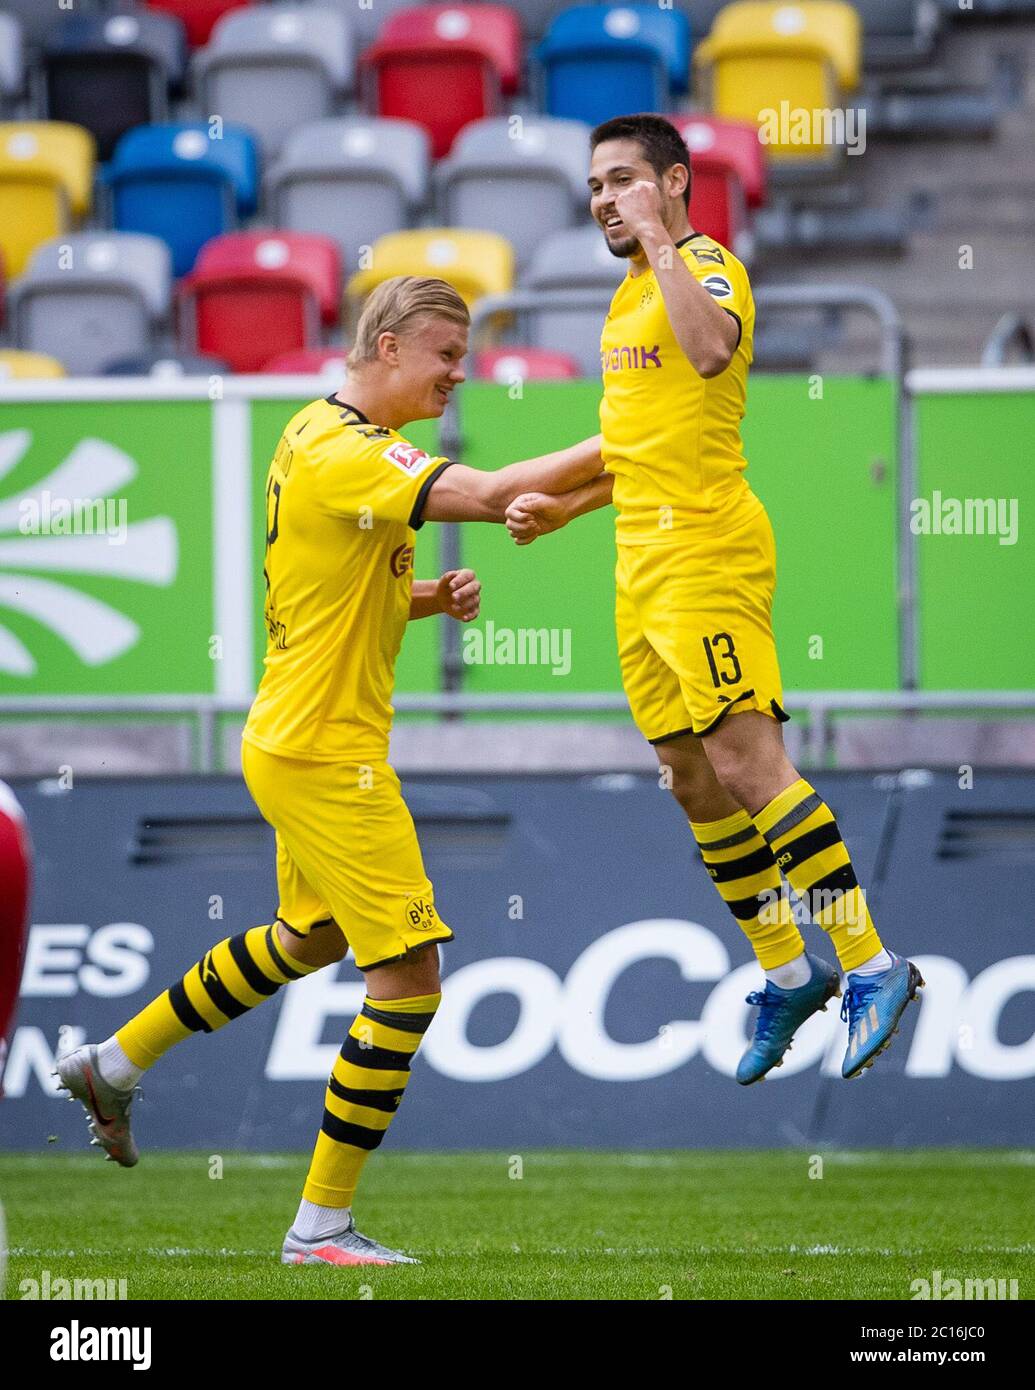 Merkur Spiel Arena Duesseldorf Germany 13.6.2020, Football: Bundesliga season 2019/20 matchday 31  Fortuna Düsseldorf (F95, white) vs Borussia Dortmund (BVB, yellow) 0:1 — Erling Haaland (BVB), Raphael Guerreiro (BVB) celebrate  Due to the Corona pandemic matches are played in empty stadiums without spectators  Foto:  Moritz Mueller /firosportphoto//POOL/via Kolvenbach       DFL REGULATIONS PROHIBIT ANY USE OF PHOTOGRAPHS AS IMAGE SEQUENCES AND OR QUASI VIDEO     EDITORIAL USE ONLY     NATIONAL AND INTERNATIONAL NEWS AGENCIES OUT c Stock Photo